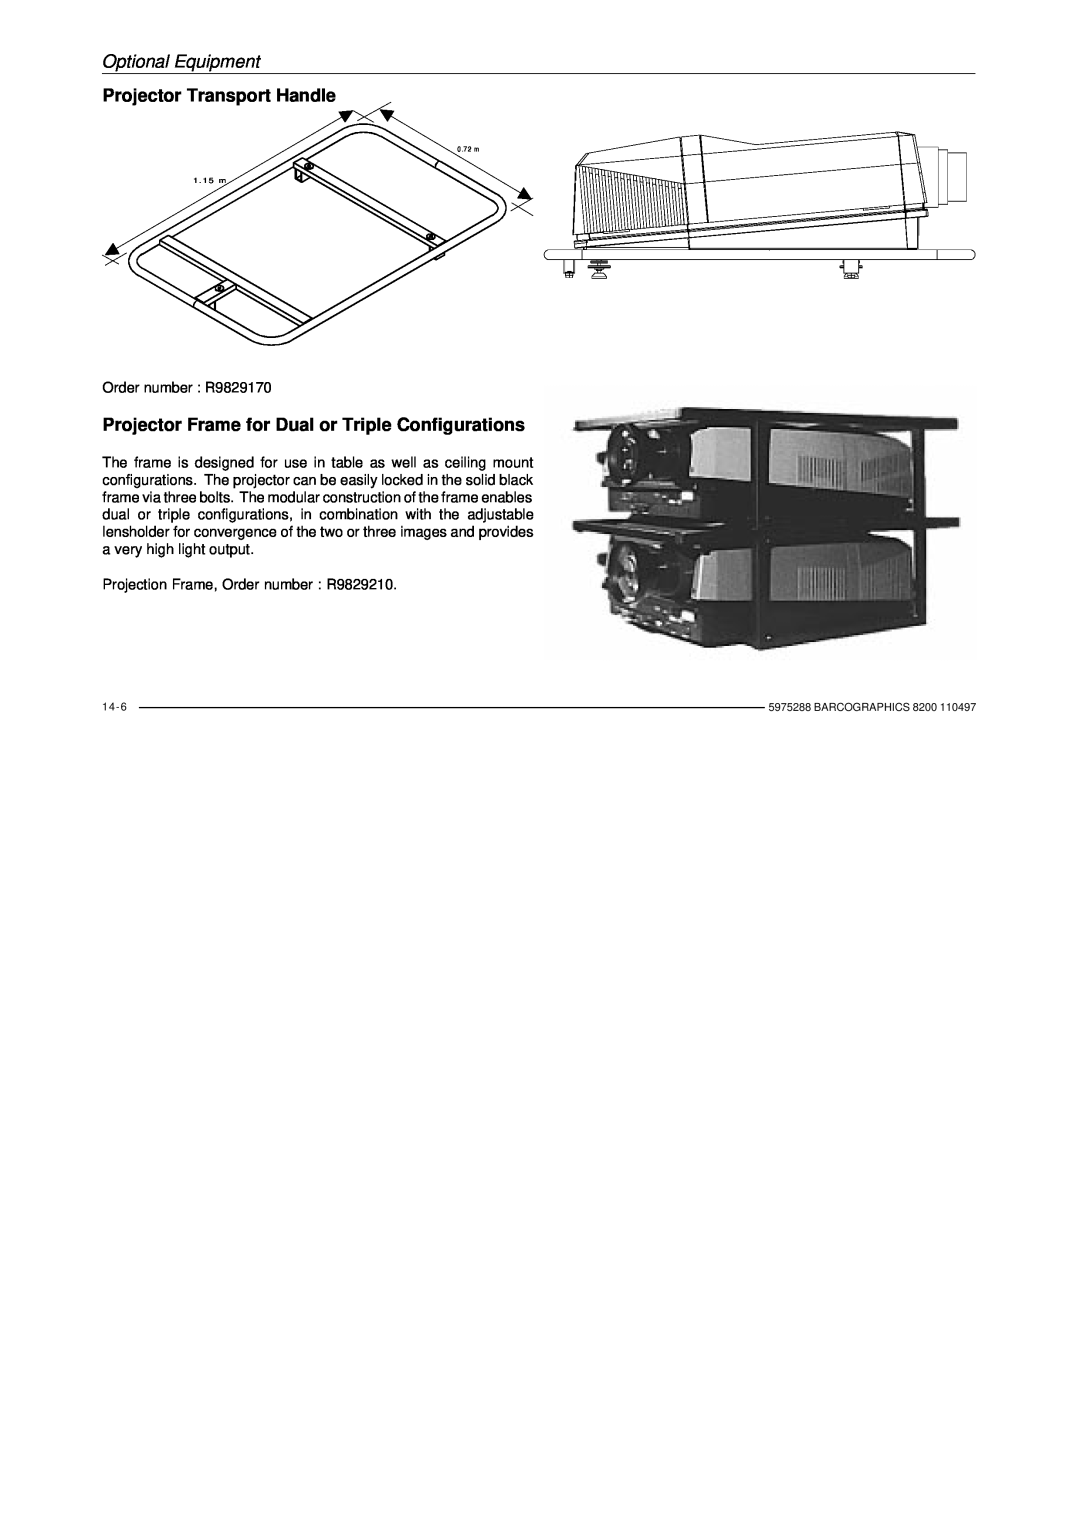 Barco R9001330 Projector Transport Handle, Projector Frame for Dual or Triple Configurations, Optional Equipment 